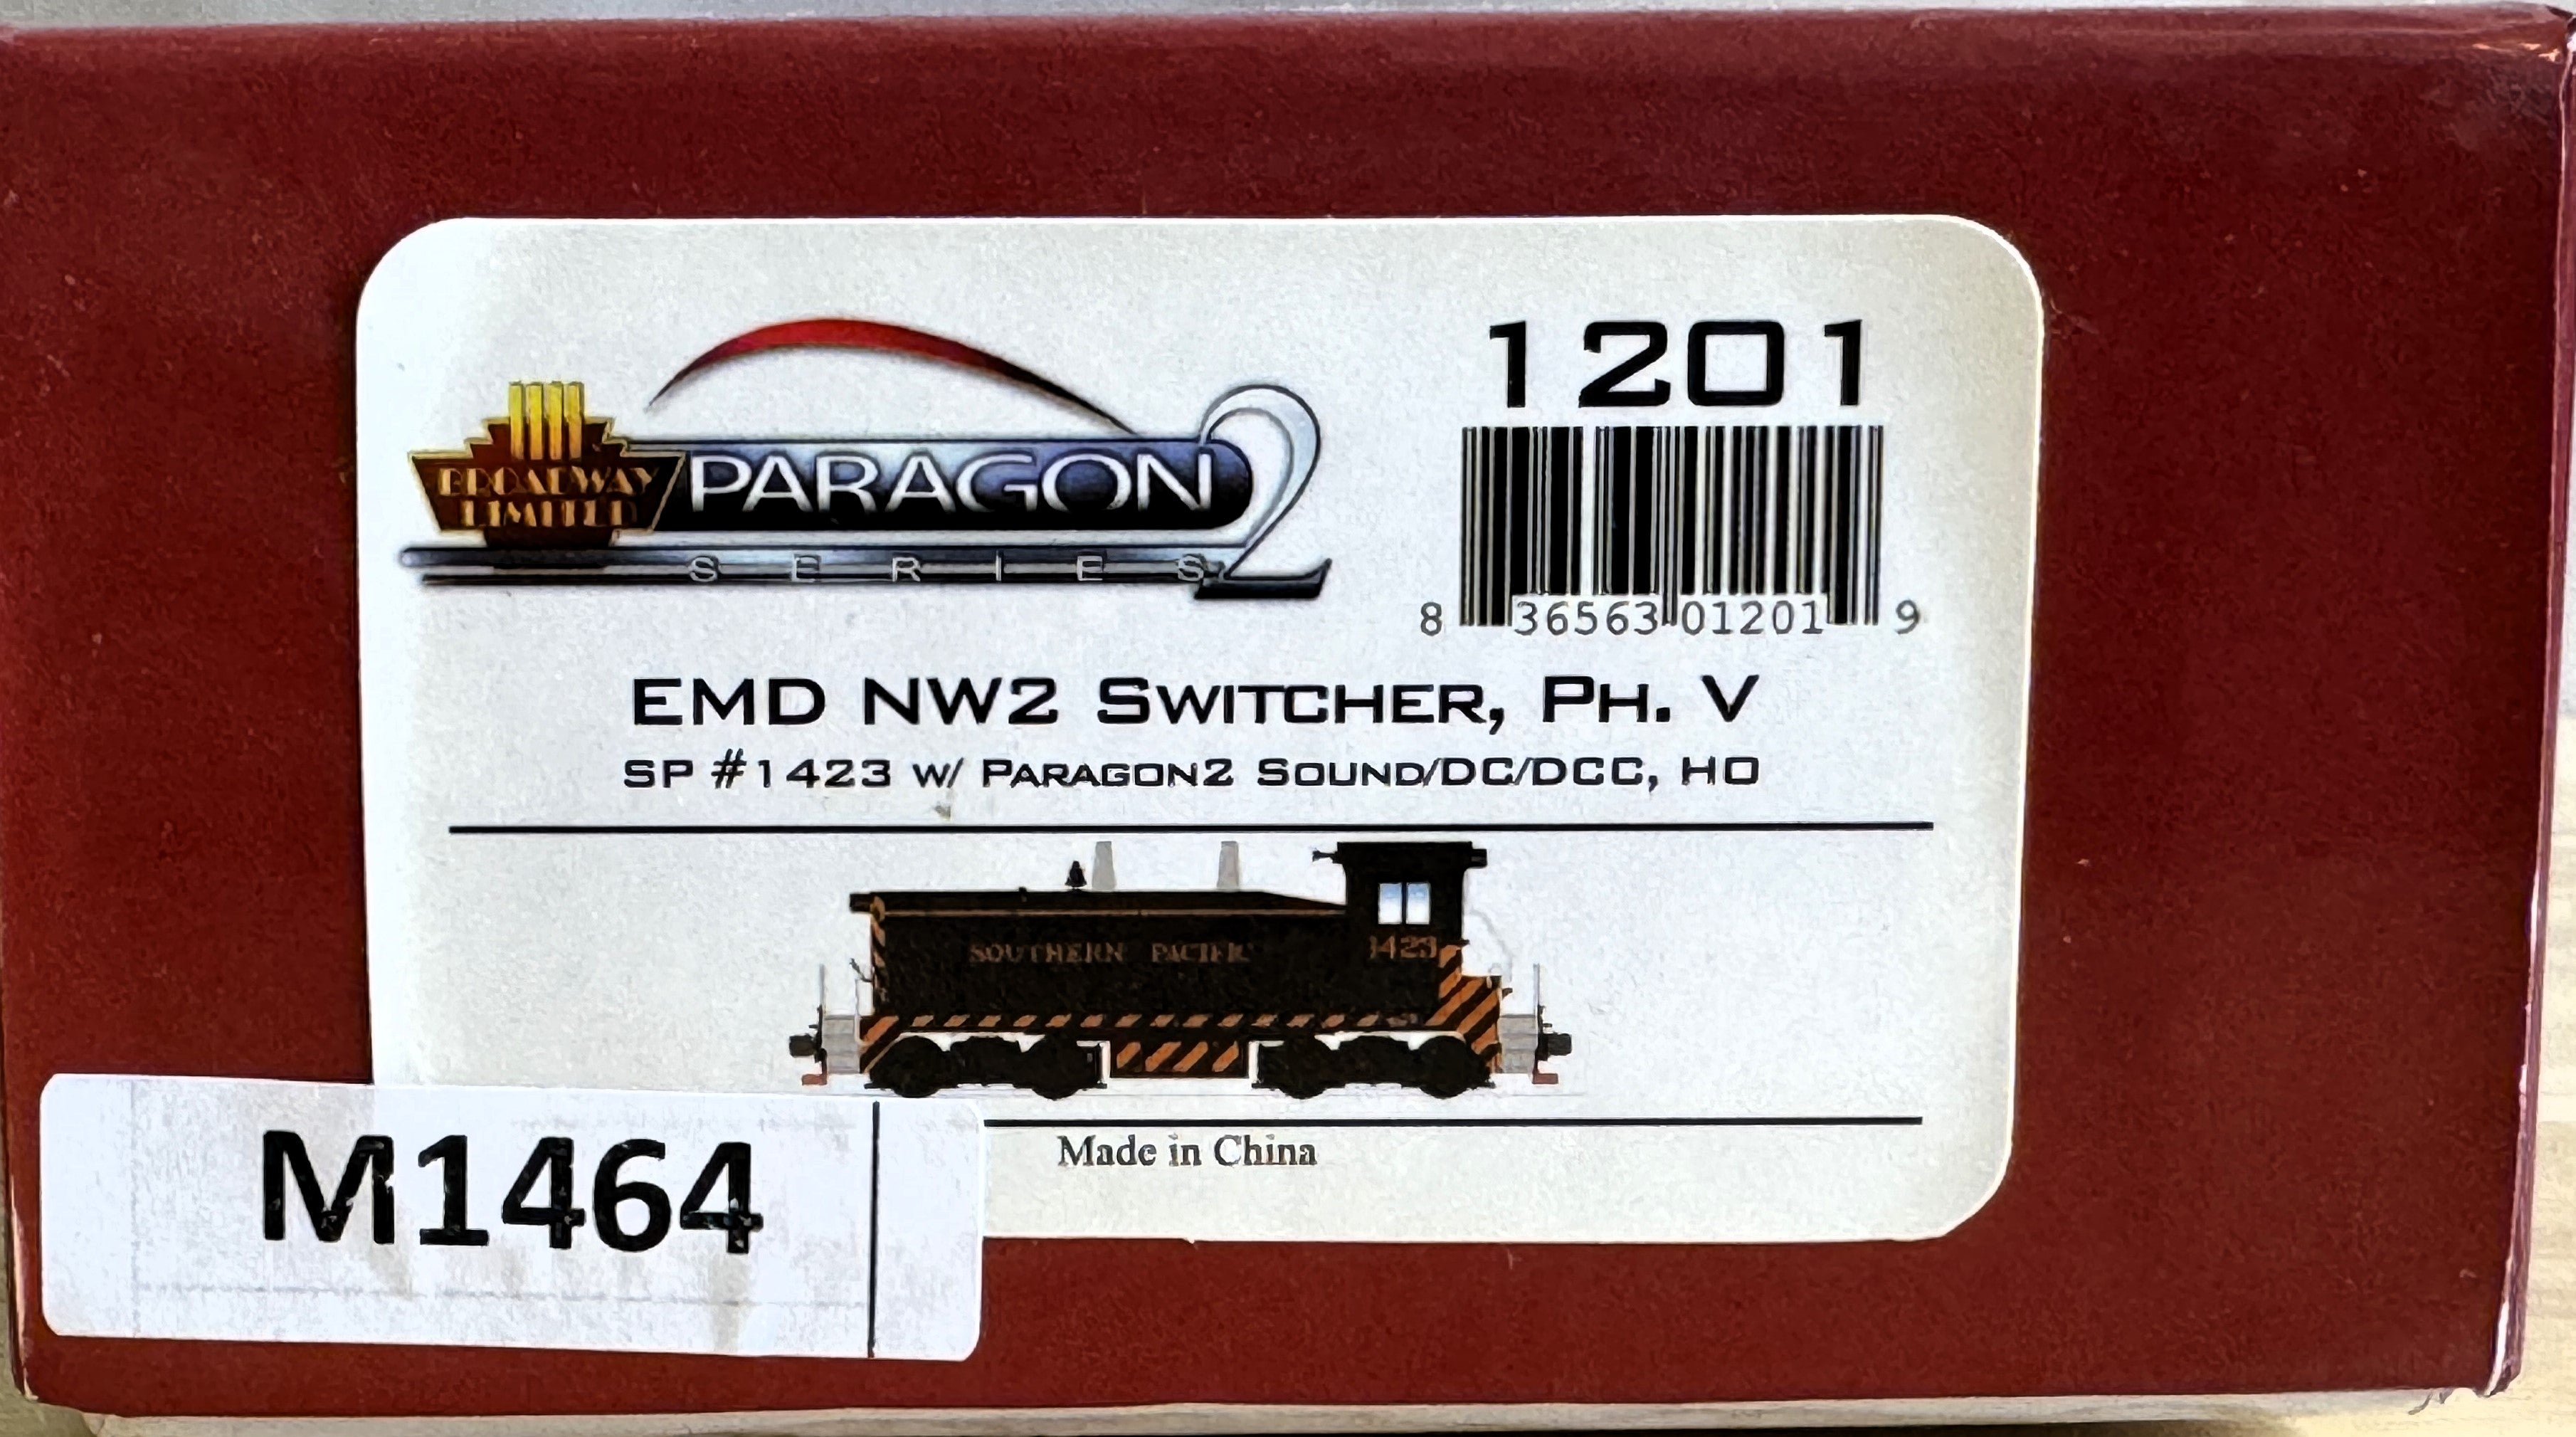 Broadway Limited 1201 HO EMD NW2 Switcher "Southern Pacific" #1423 w Paragon2 (DCC)-Second hand-M1464